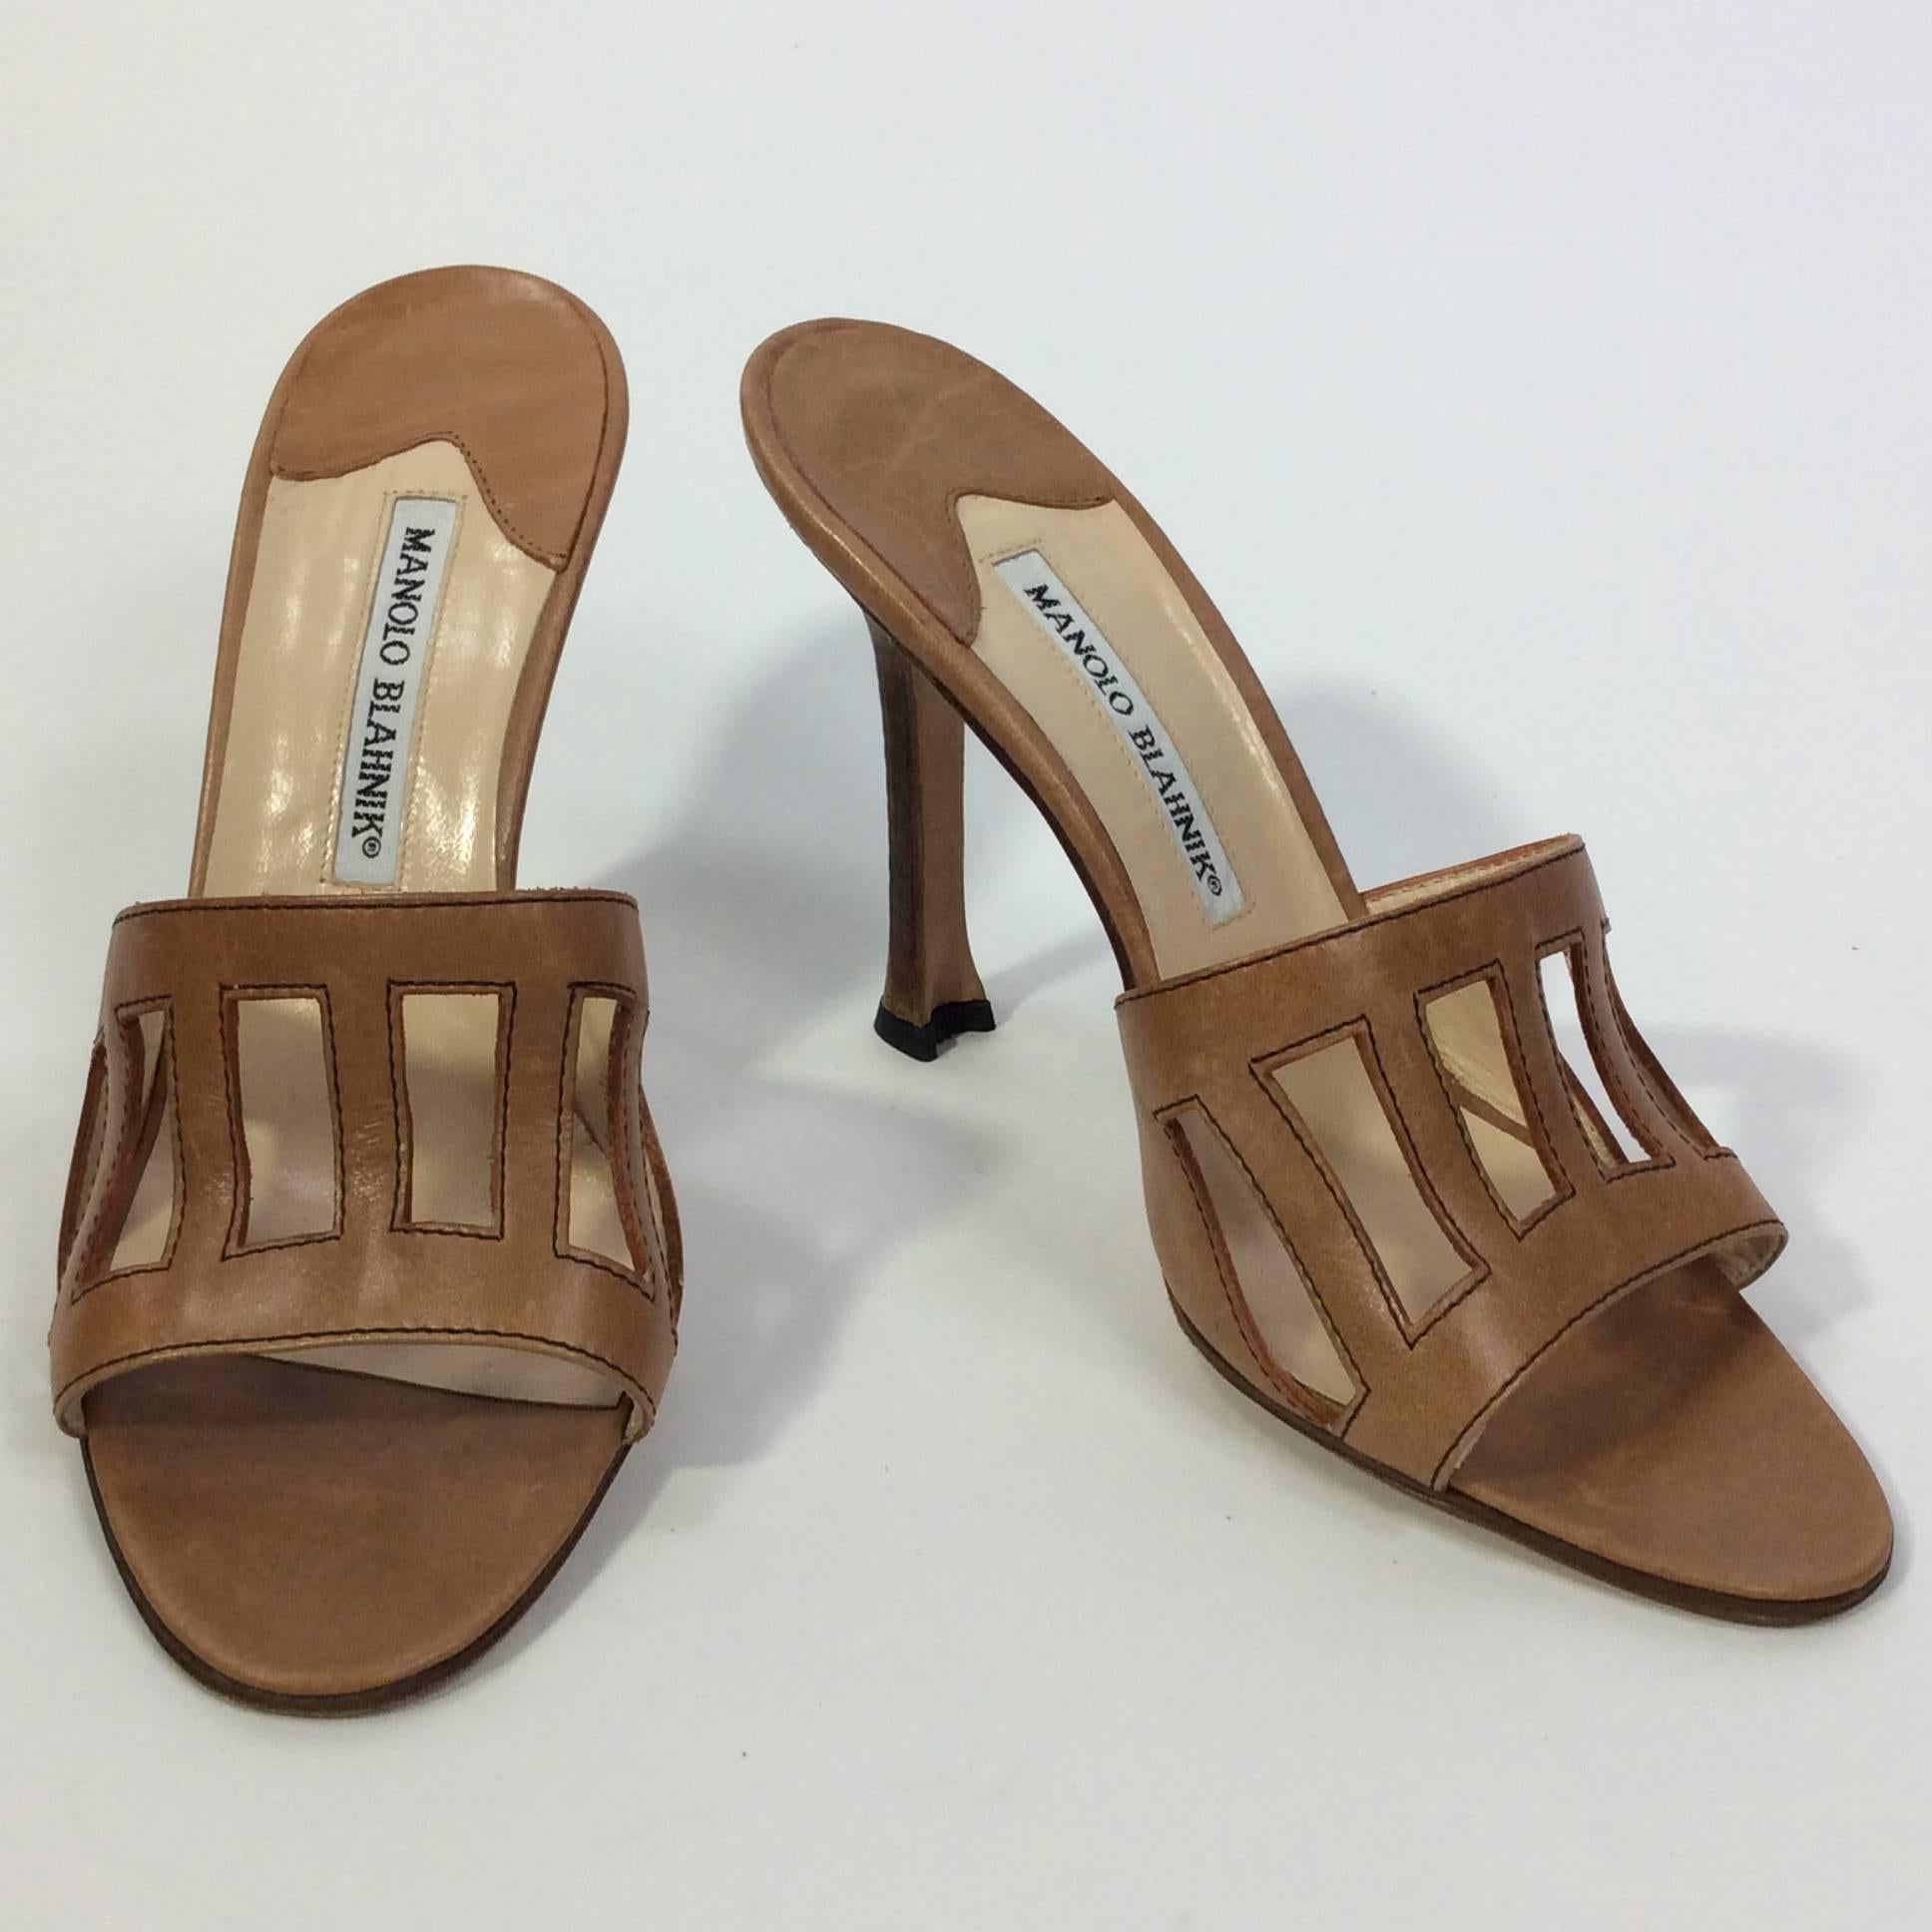 Tan Slide with Rectangular Cutouts
4 inch wooden heel
3 inch sole width
Black topstitching around cutouts
Size 37.5 (equates to US 7)
Leather upper and leather sole